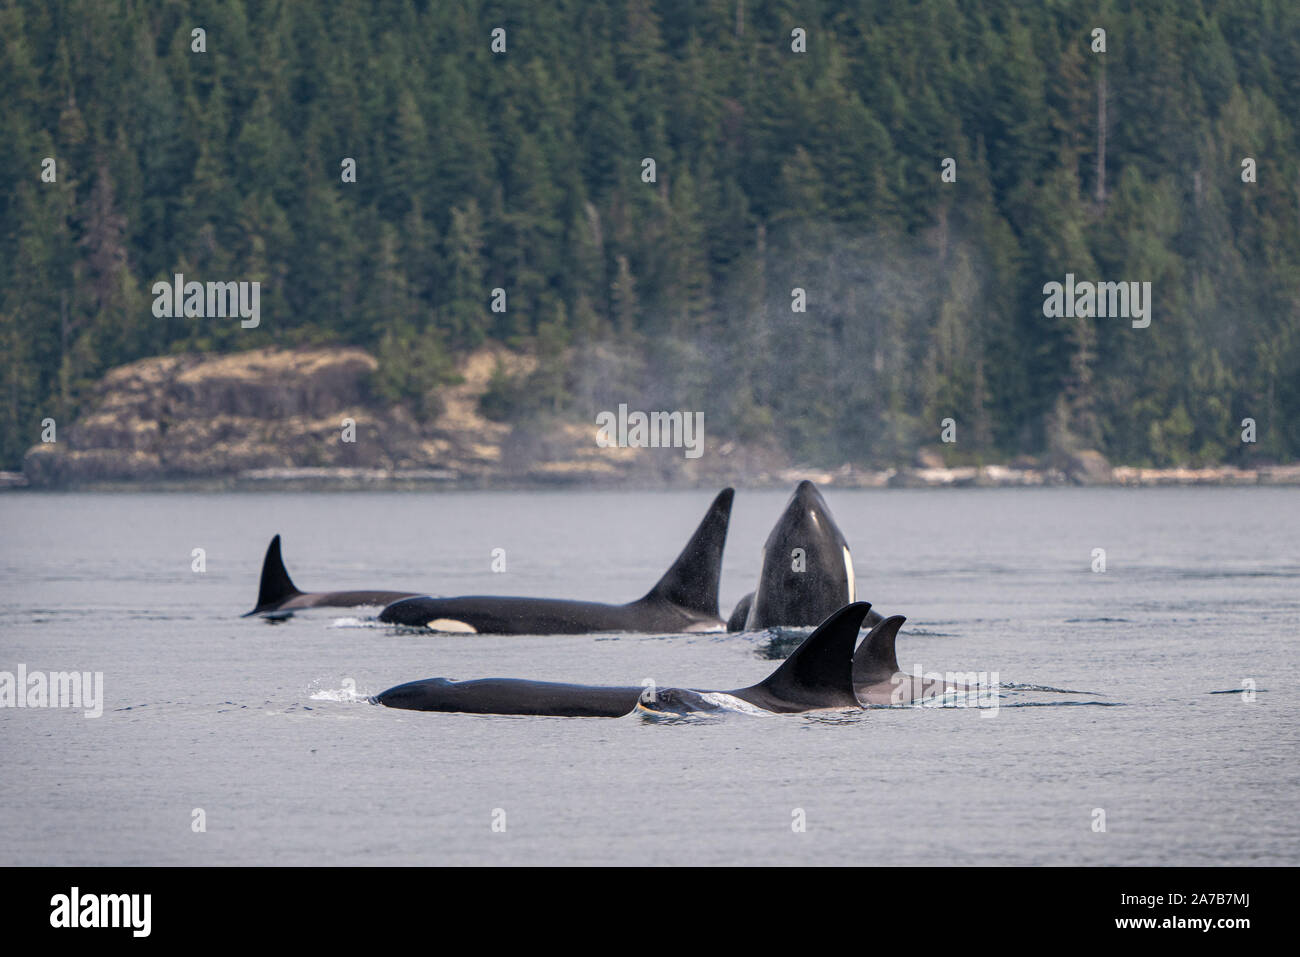 Biggs (transient killer whales) orca whales in Johnstone Strait, Vancouver Island, First Nations Territory, British Columbia, Canada. Stock Photo